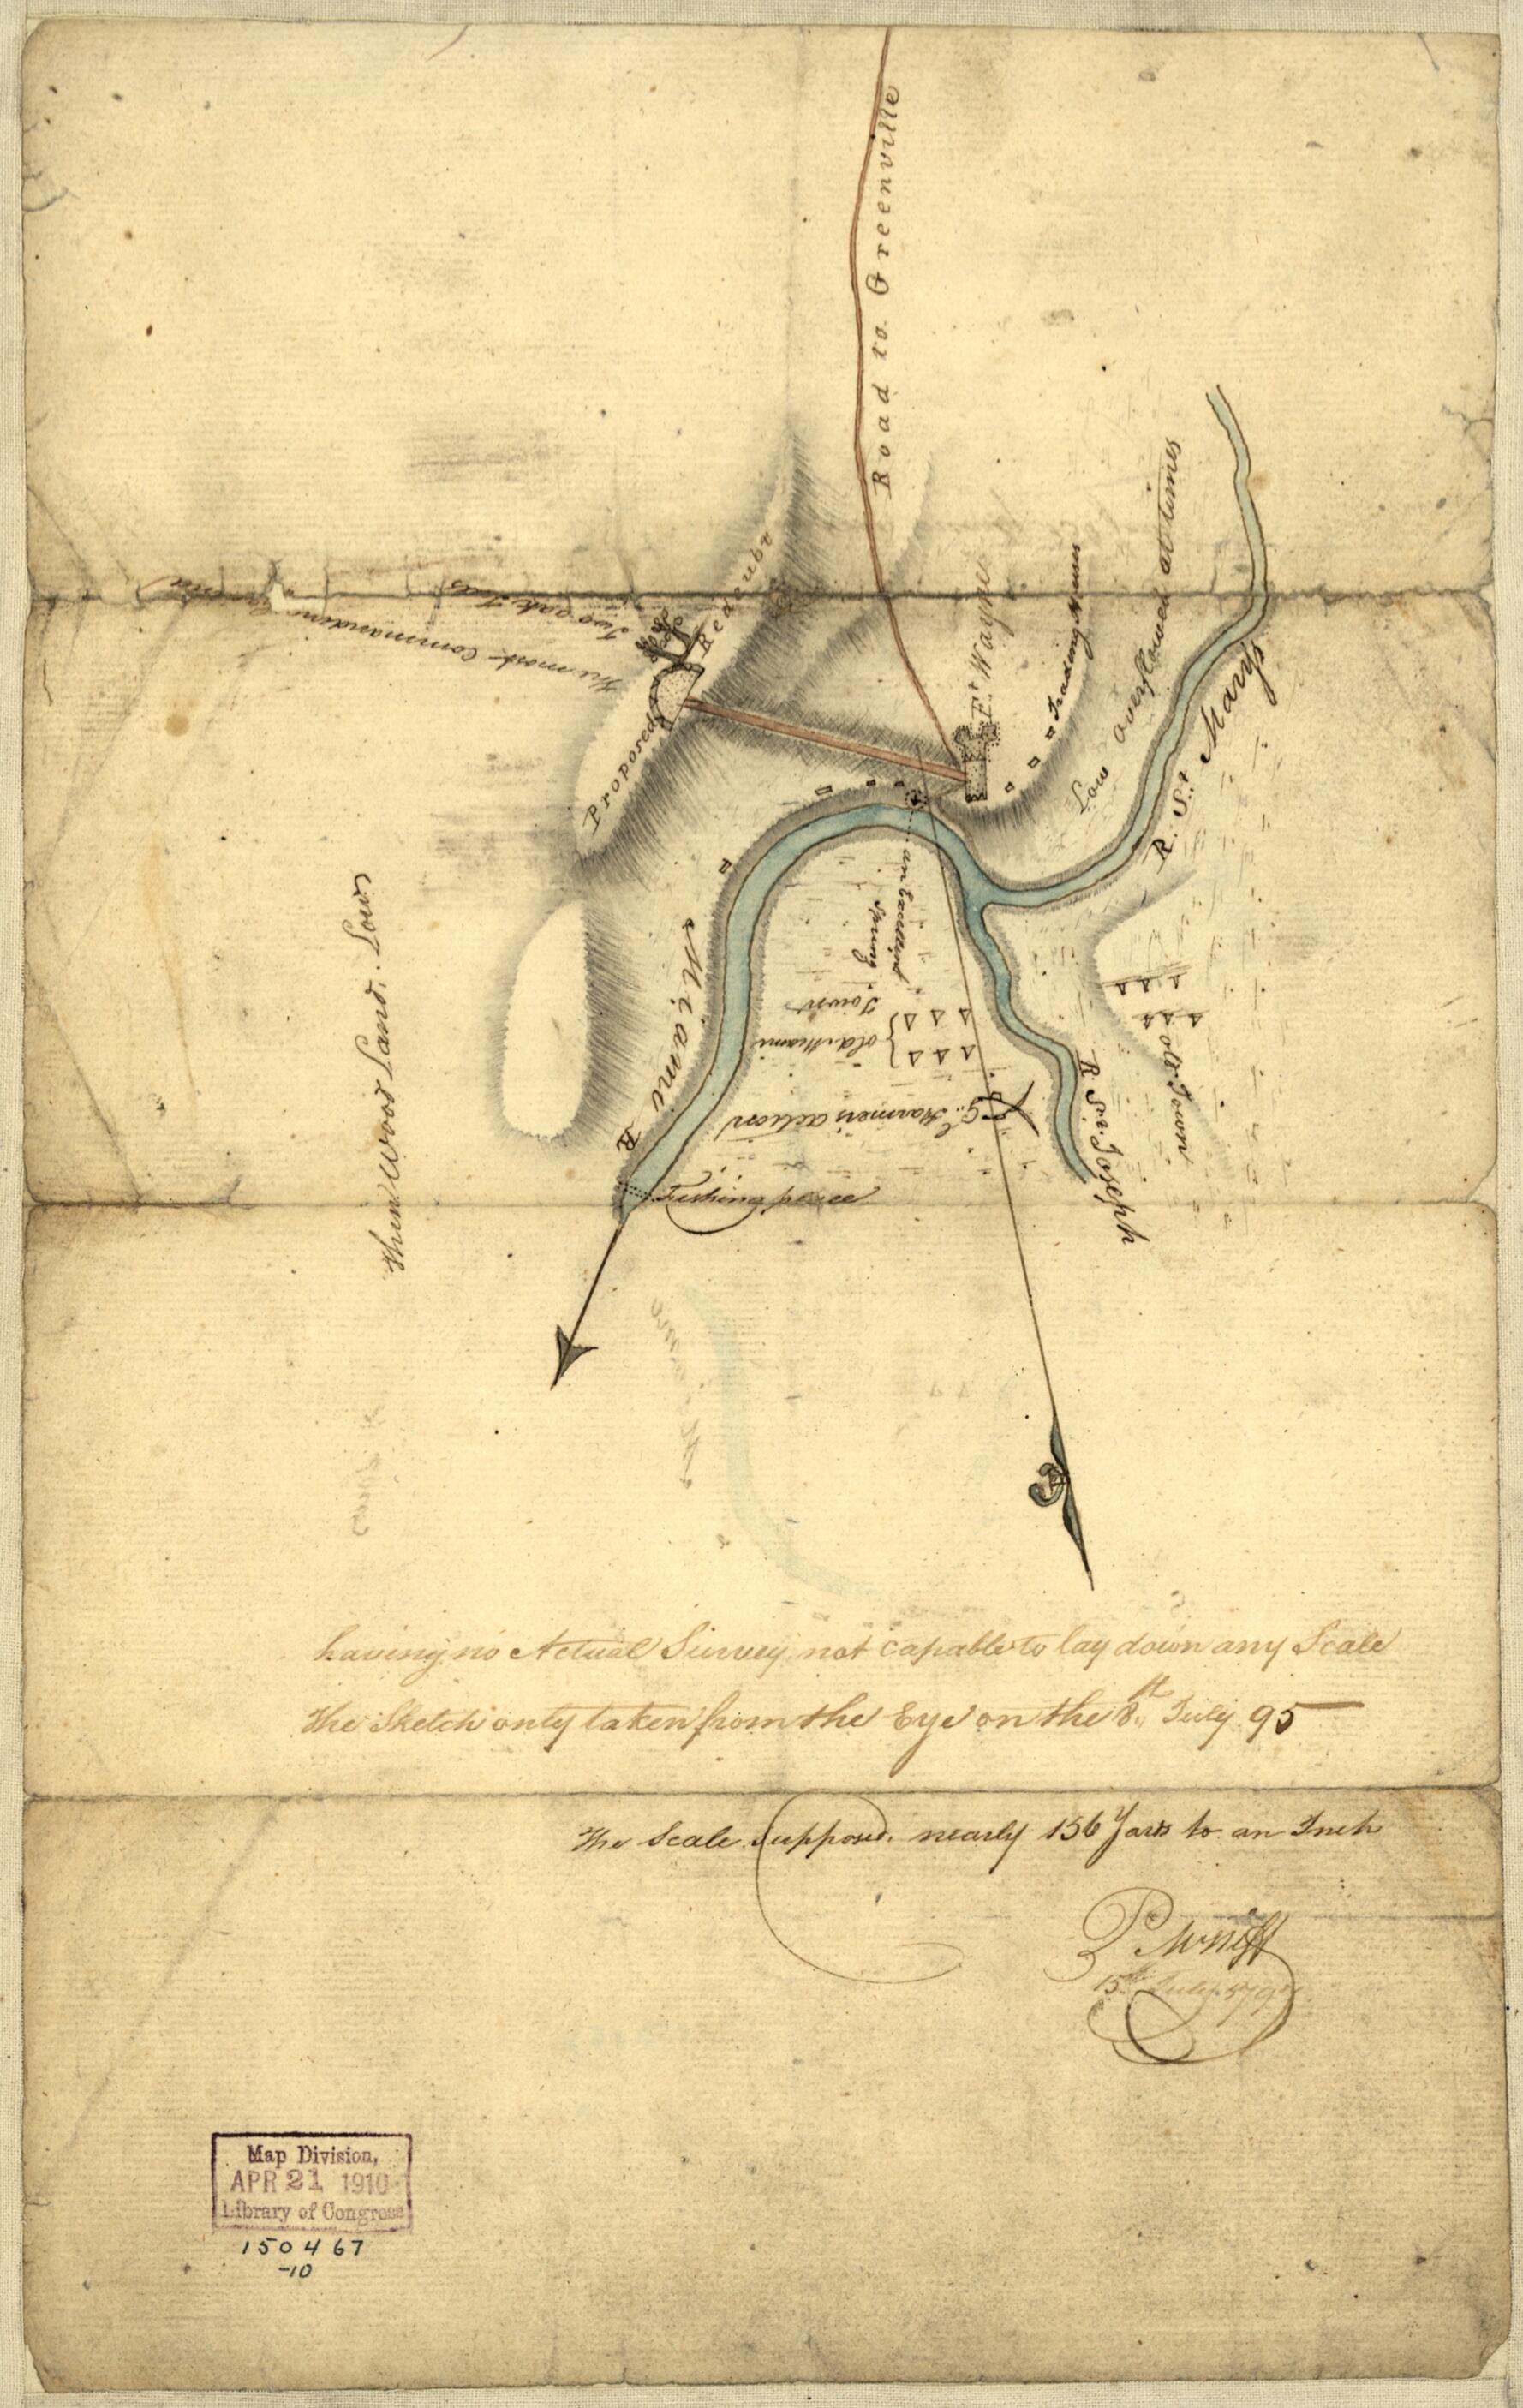 This old map of Indiana Fort Wayne : Ms. Map of Fort Wayne Said to Have Been Made On July 18, from 1795, for General Anthony Wayne was created by P. M. Neff in 1795